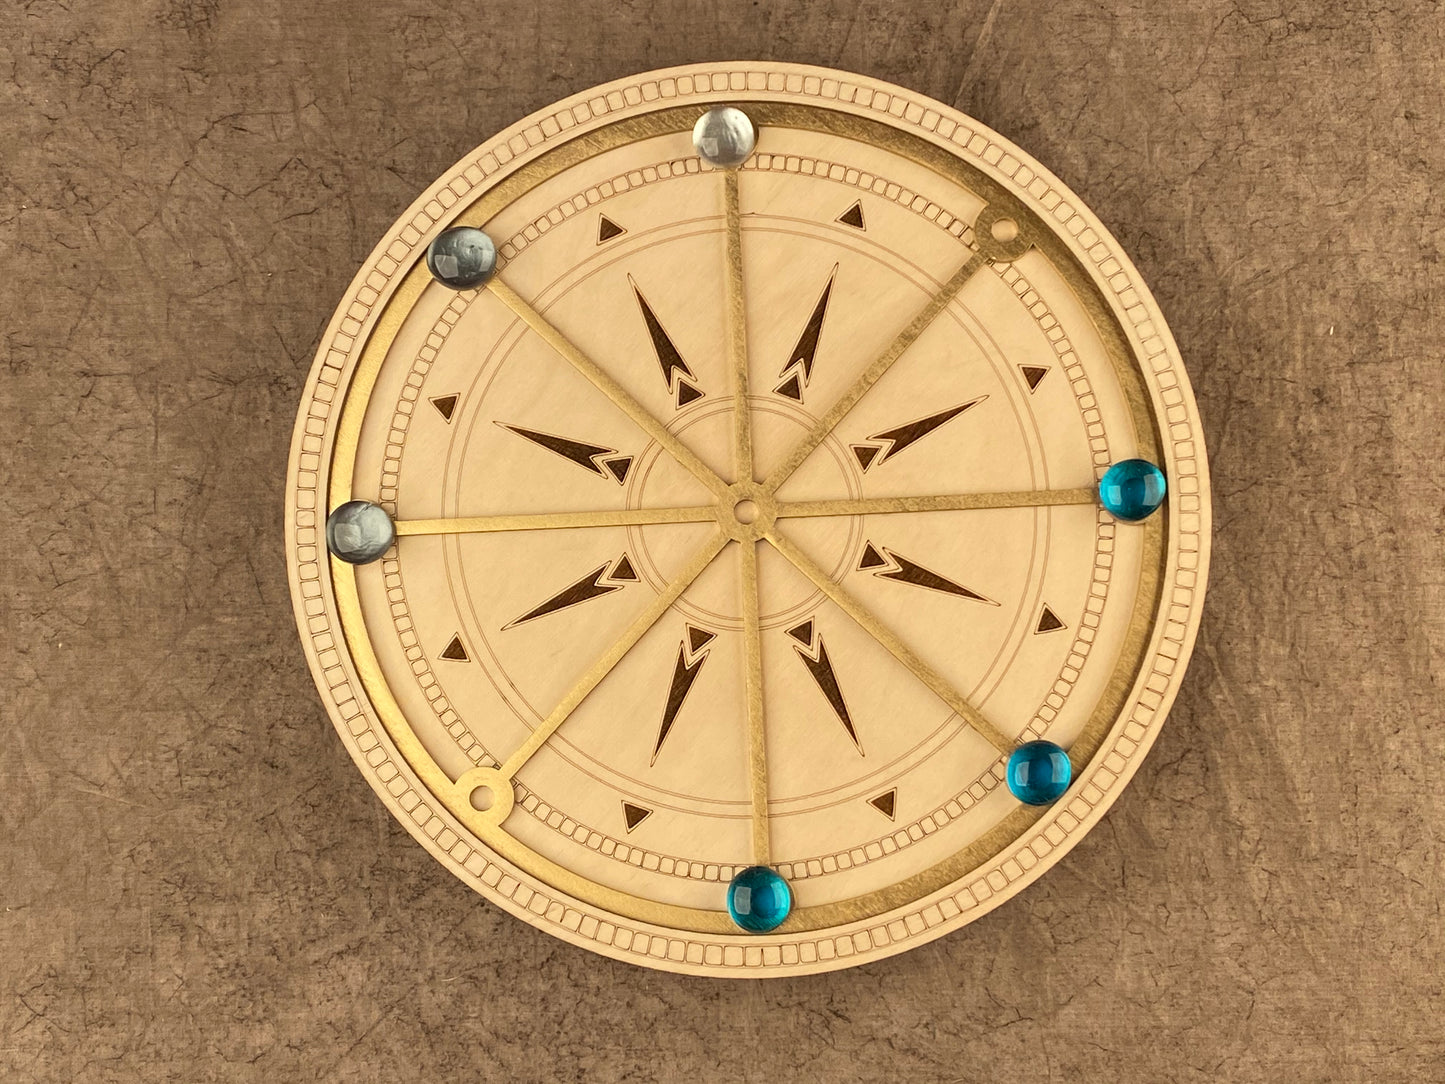 Rota ~ The Ancient Roman Game of Strategy. Beautiful Game fit for the Roman Senate.